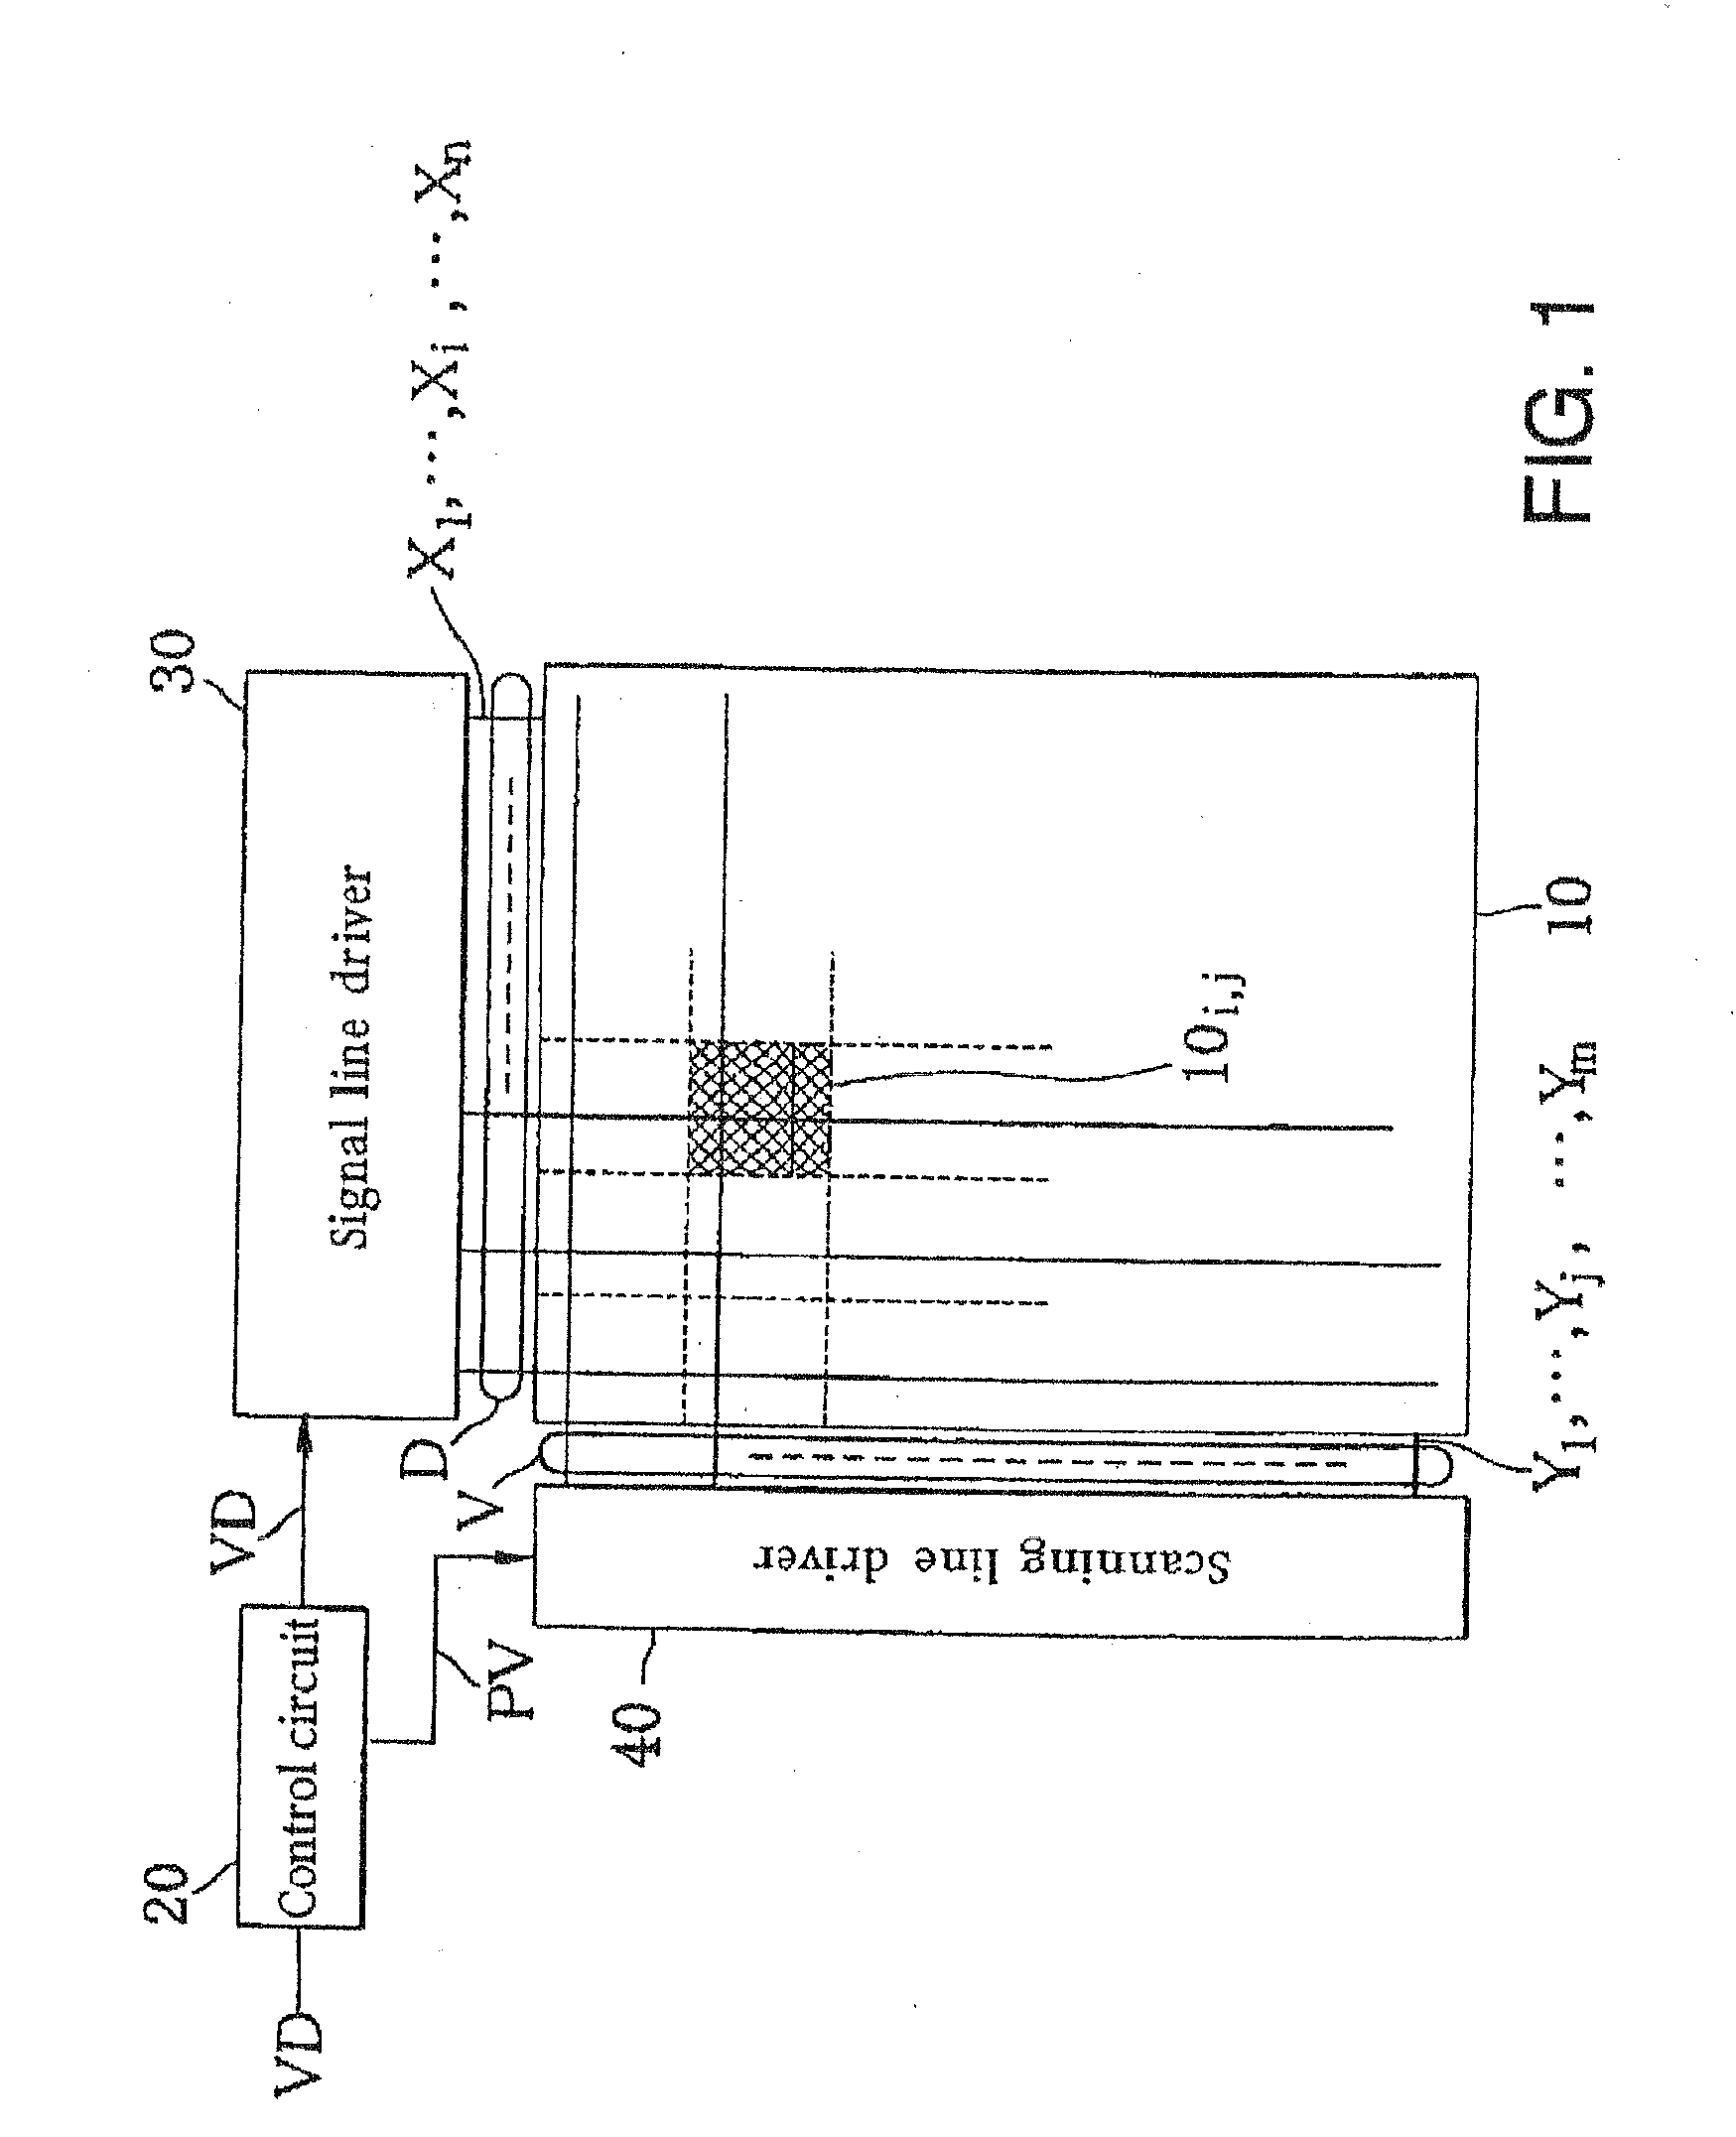 Image display apparatus and control method therefor